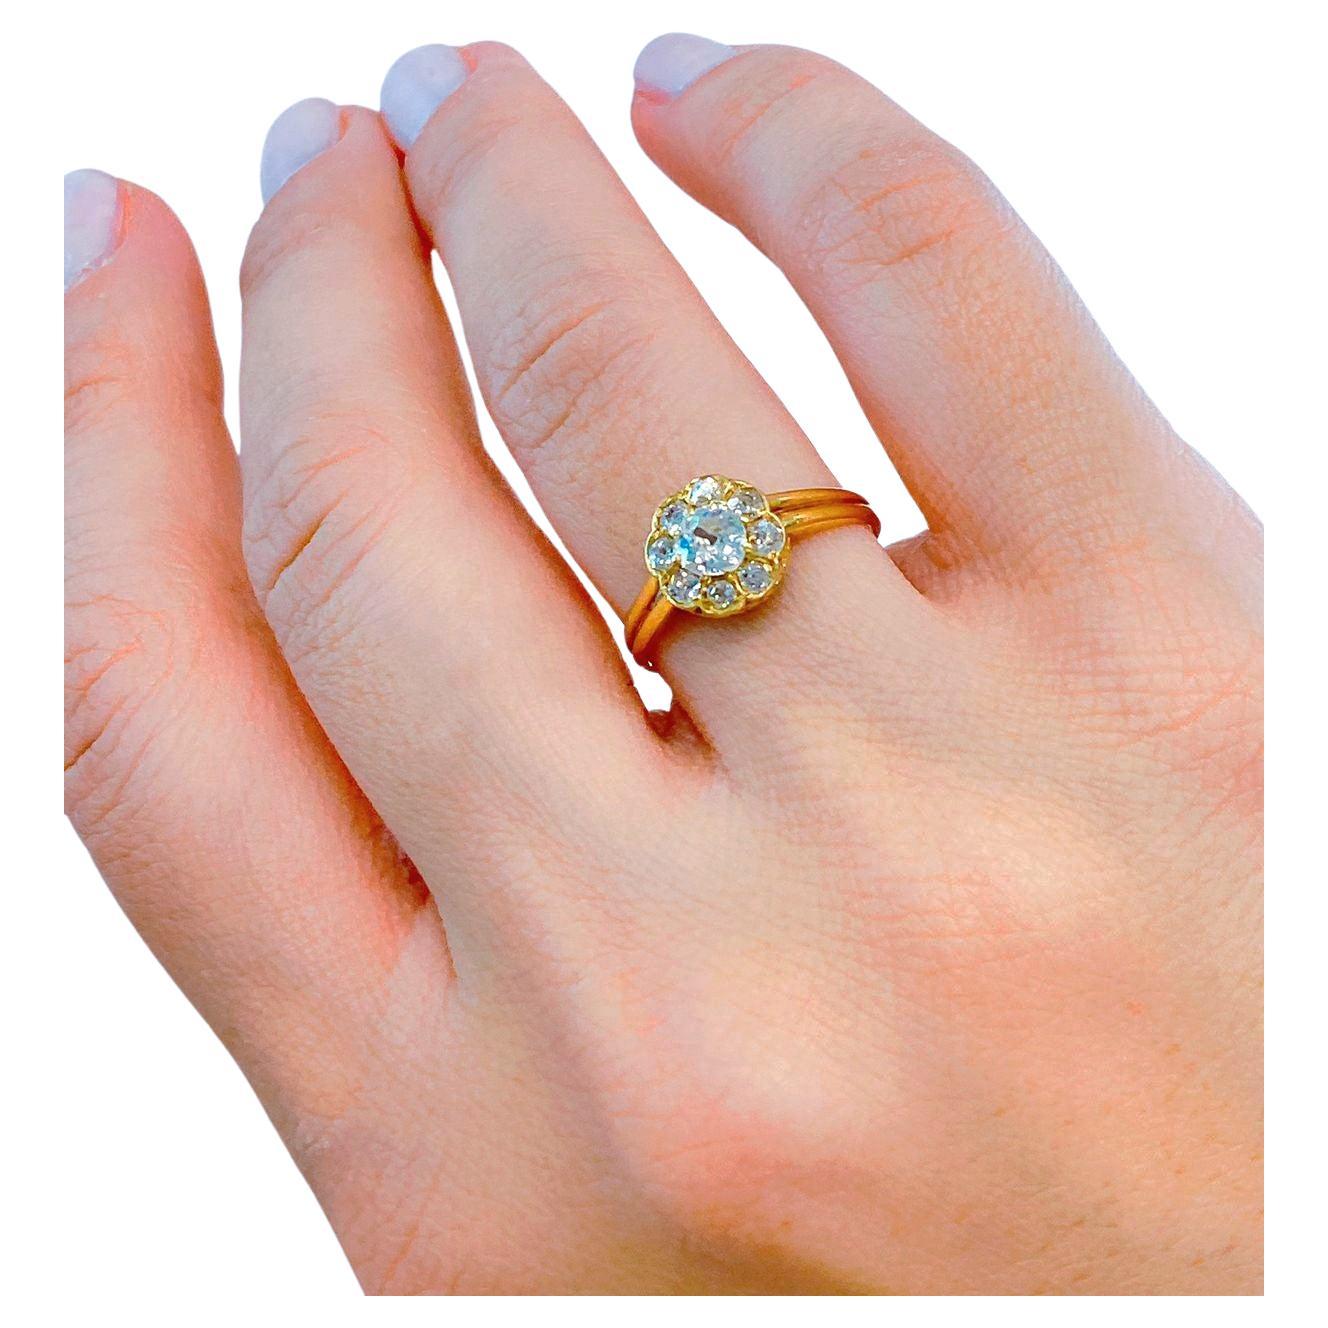 Antique 14k yellow gold ring in solitaire style centered with 1 old mine cut diamond diameter 4.25mm estimate 0.30 ct and ring head diameter 7mm flanked with smaller old mine cut diamonds dates back to europe 1910.c